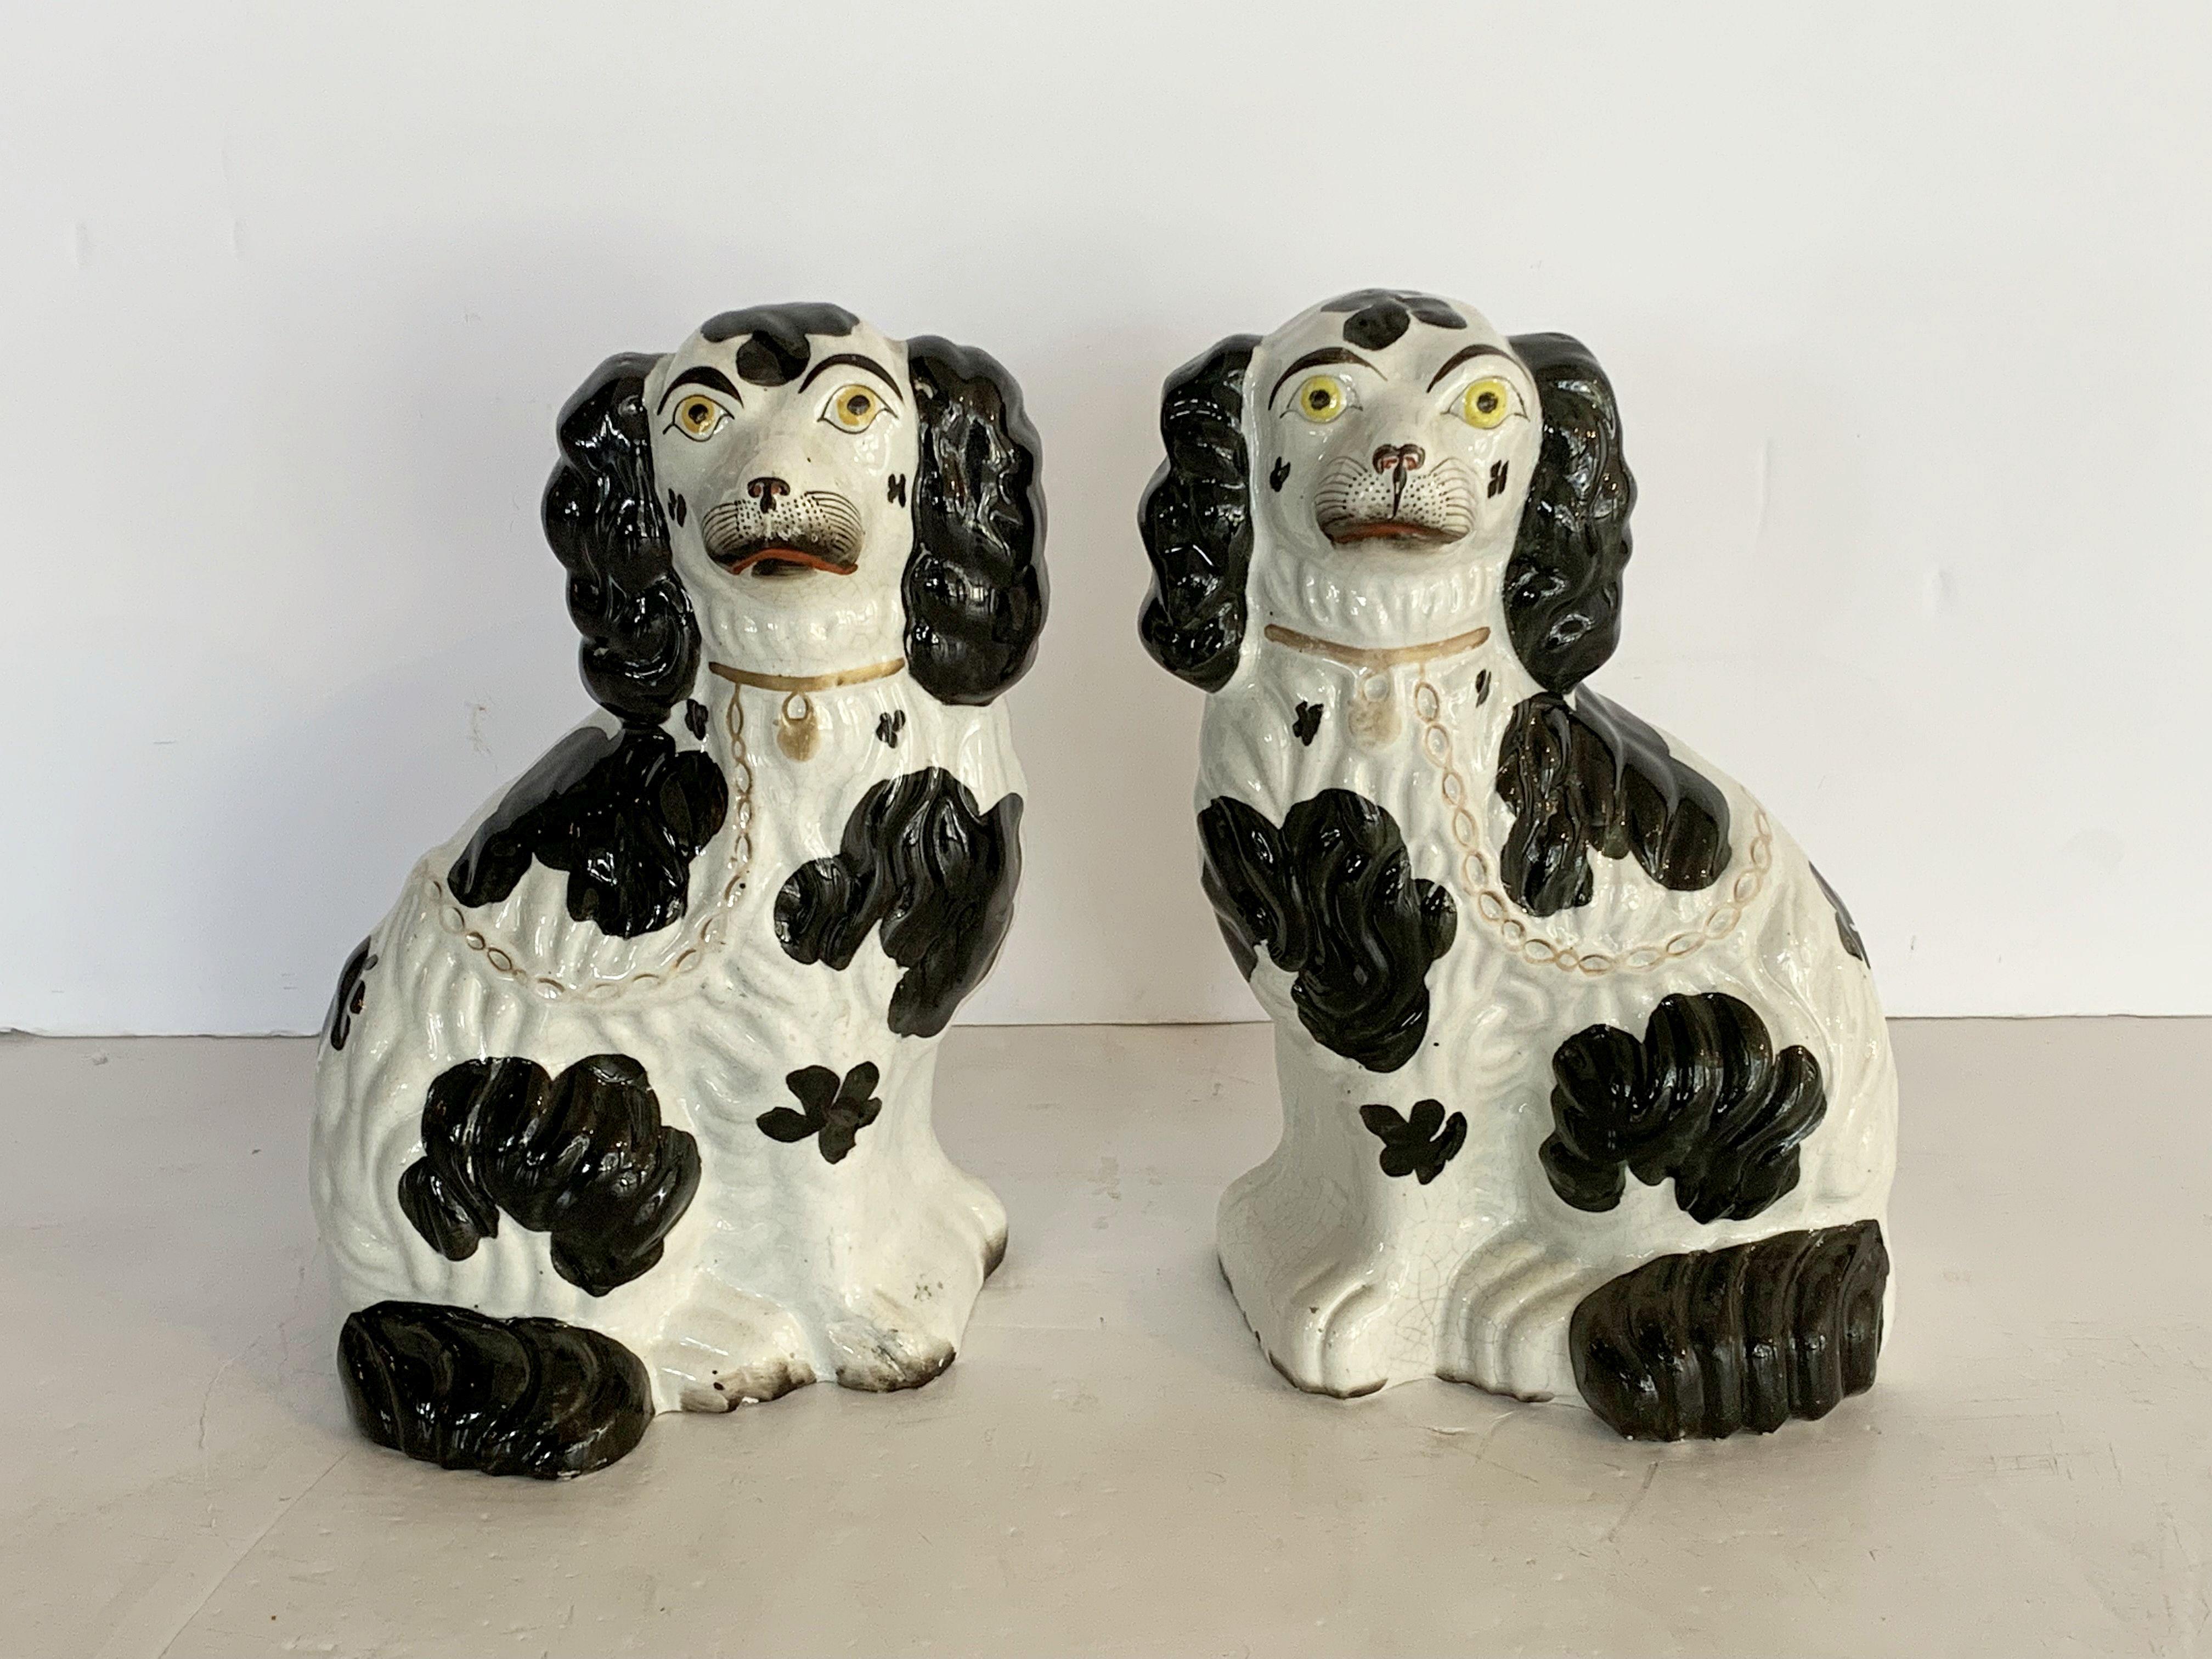 A handsome pair of 19th century. English King Charles spaniels from the Staffordshire Potteries. 

Also known as comforter dogs, this pair is from the early period of production - the high mark era known for its Fine attention to modeled detail,